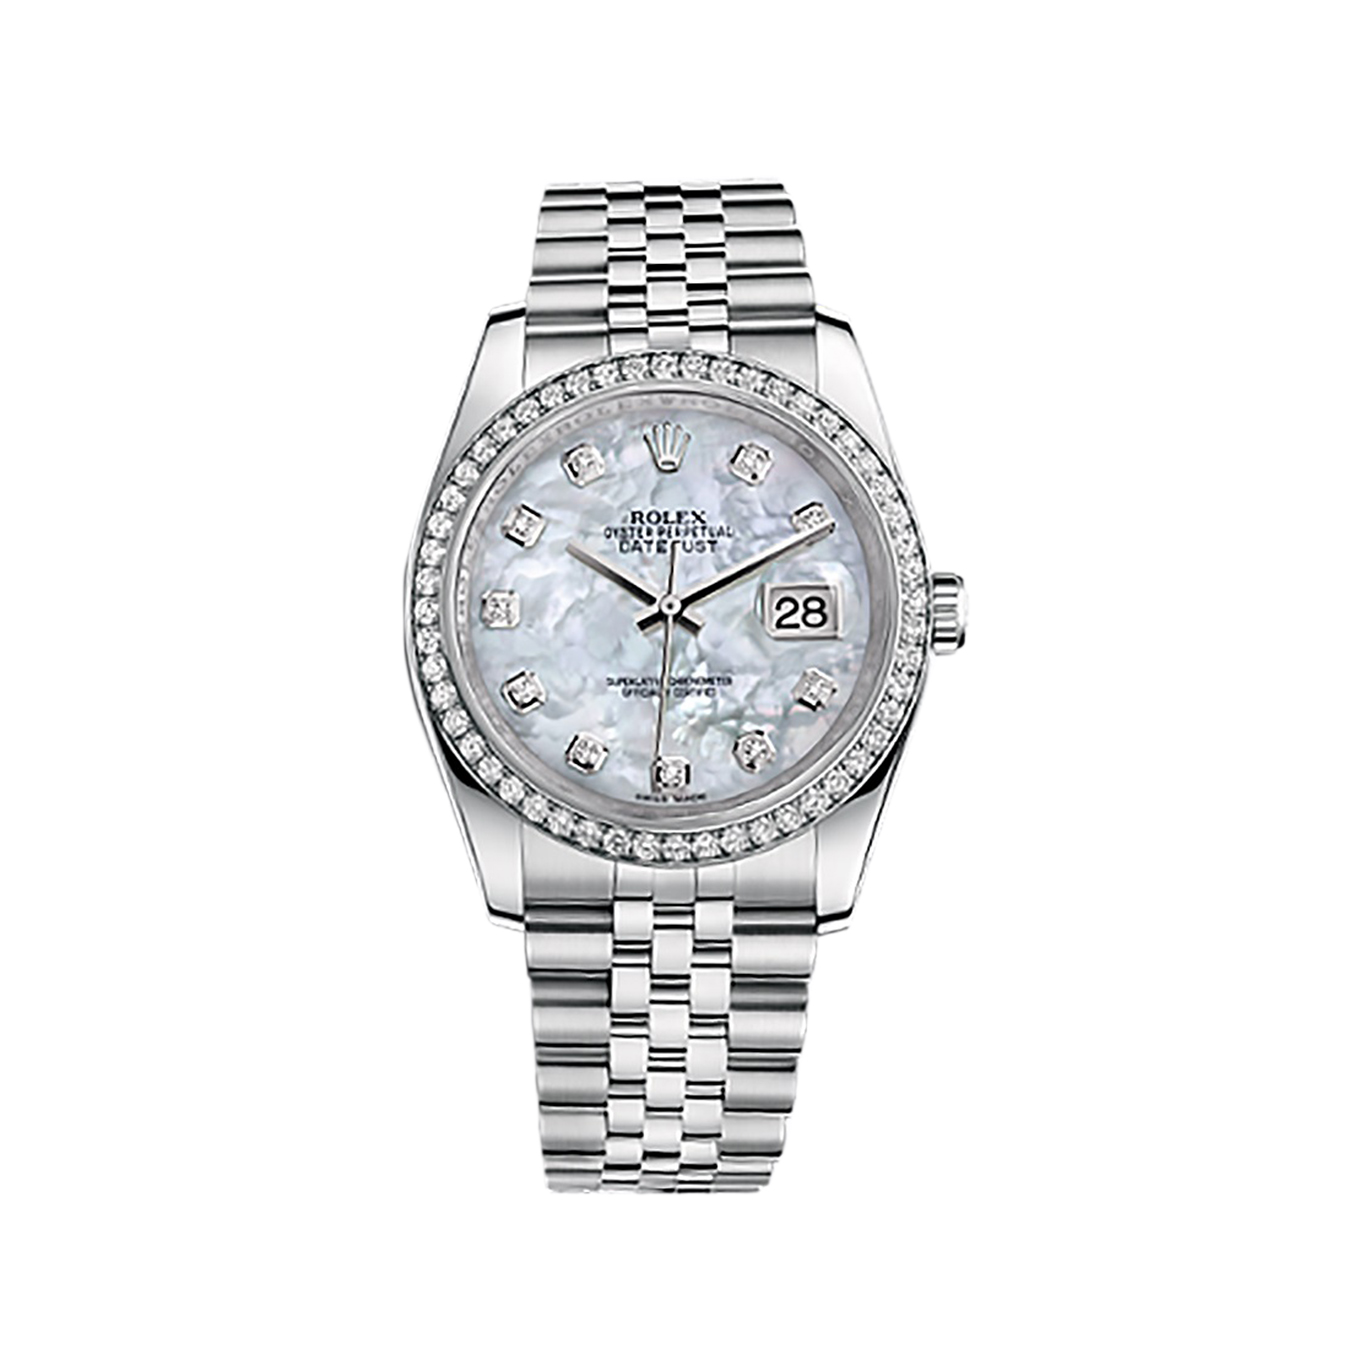 Datejust 36 116244 White Gold & Stainless Steel Watch (White Mother-of-Pearl Set with Diamonds)